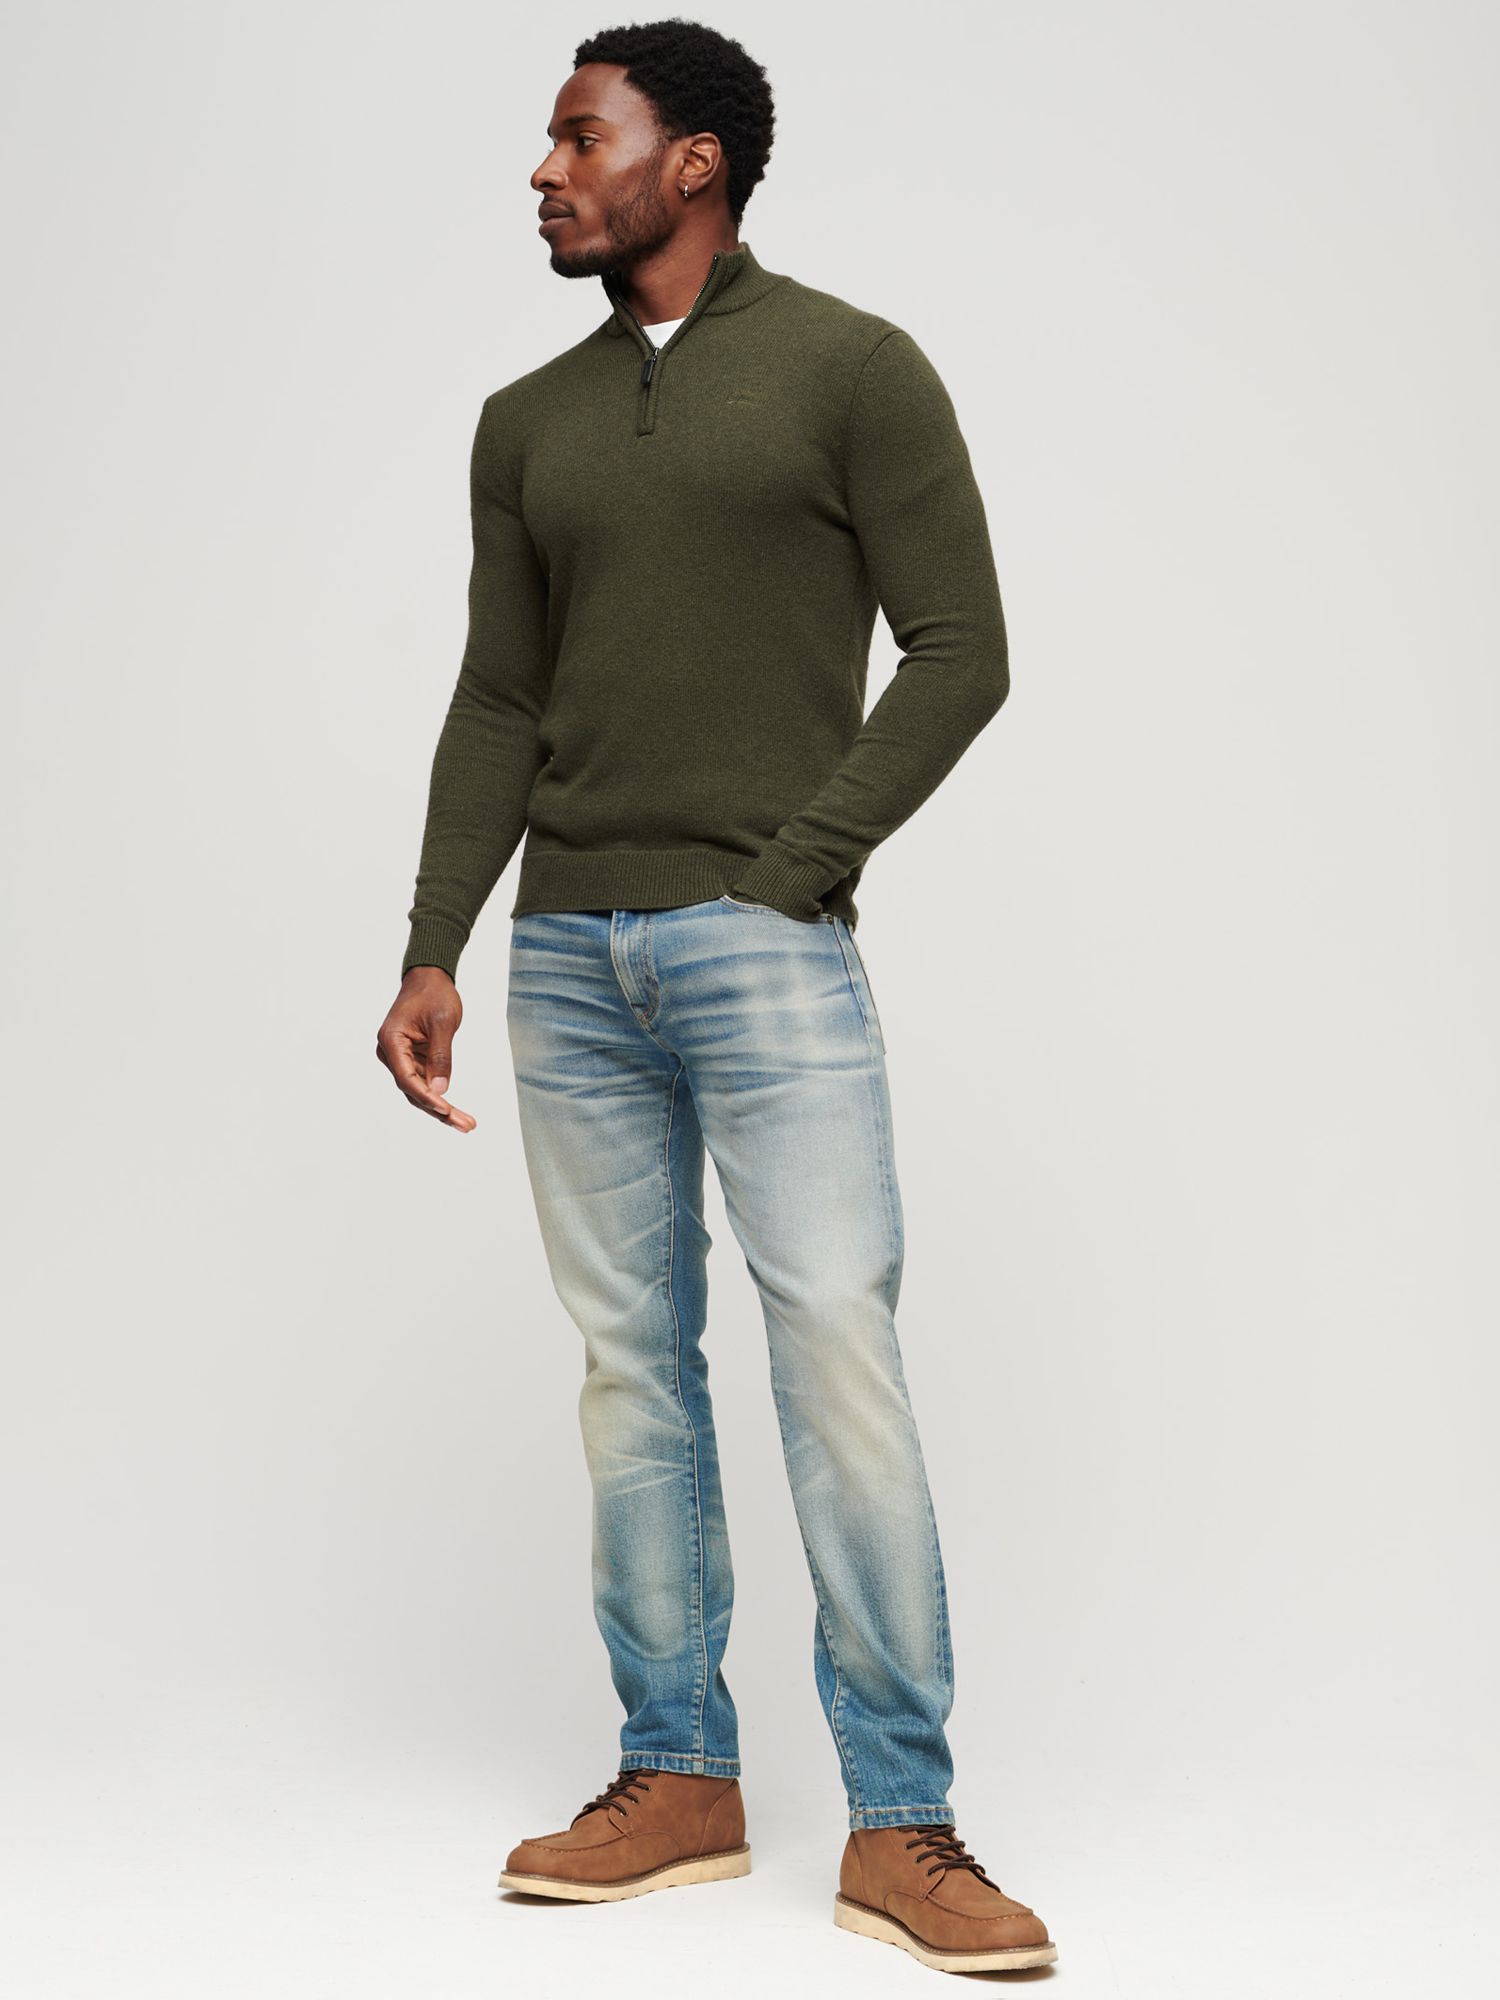 Superdry Essential Embroidered Knit Henley Jumper, Spruce Green, S